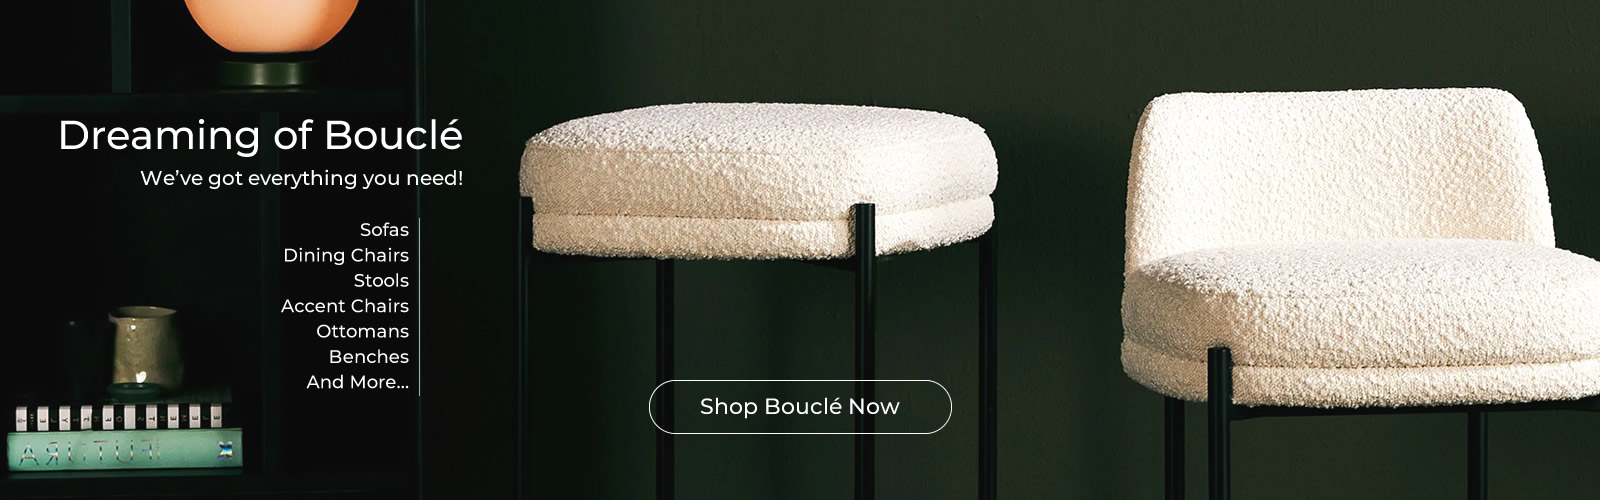 Shop by Boucle Banner